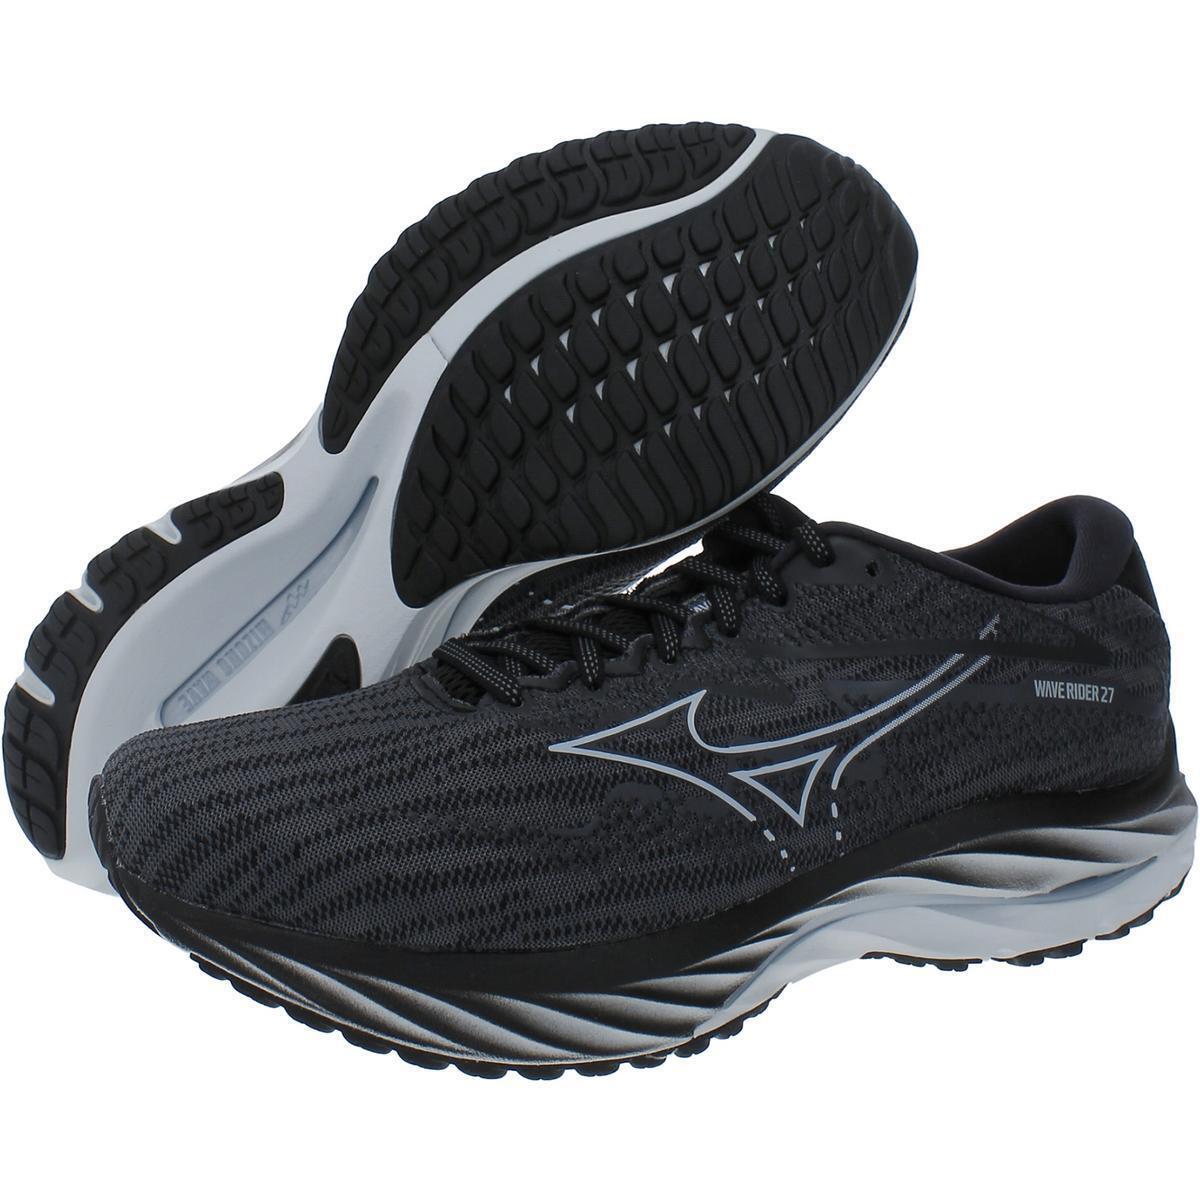 Mizuno Womens Wave Rider 27 Fitness Running Training Shoes Sneakers Bhfo 5206 - Black/Grey/Silver